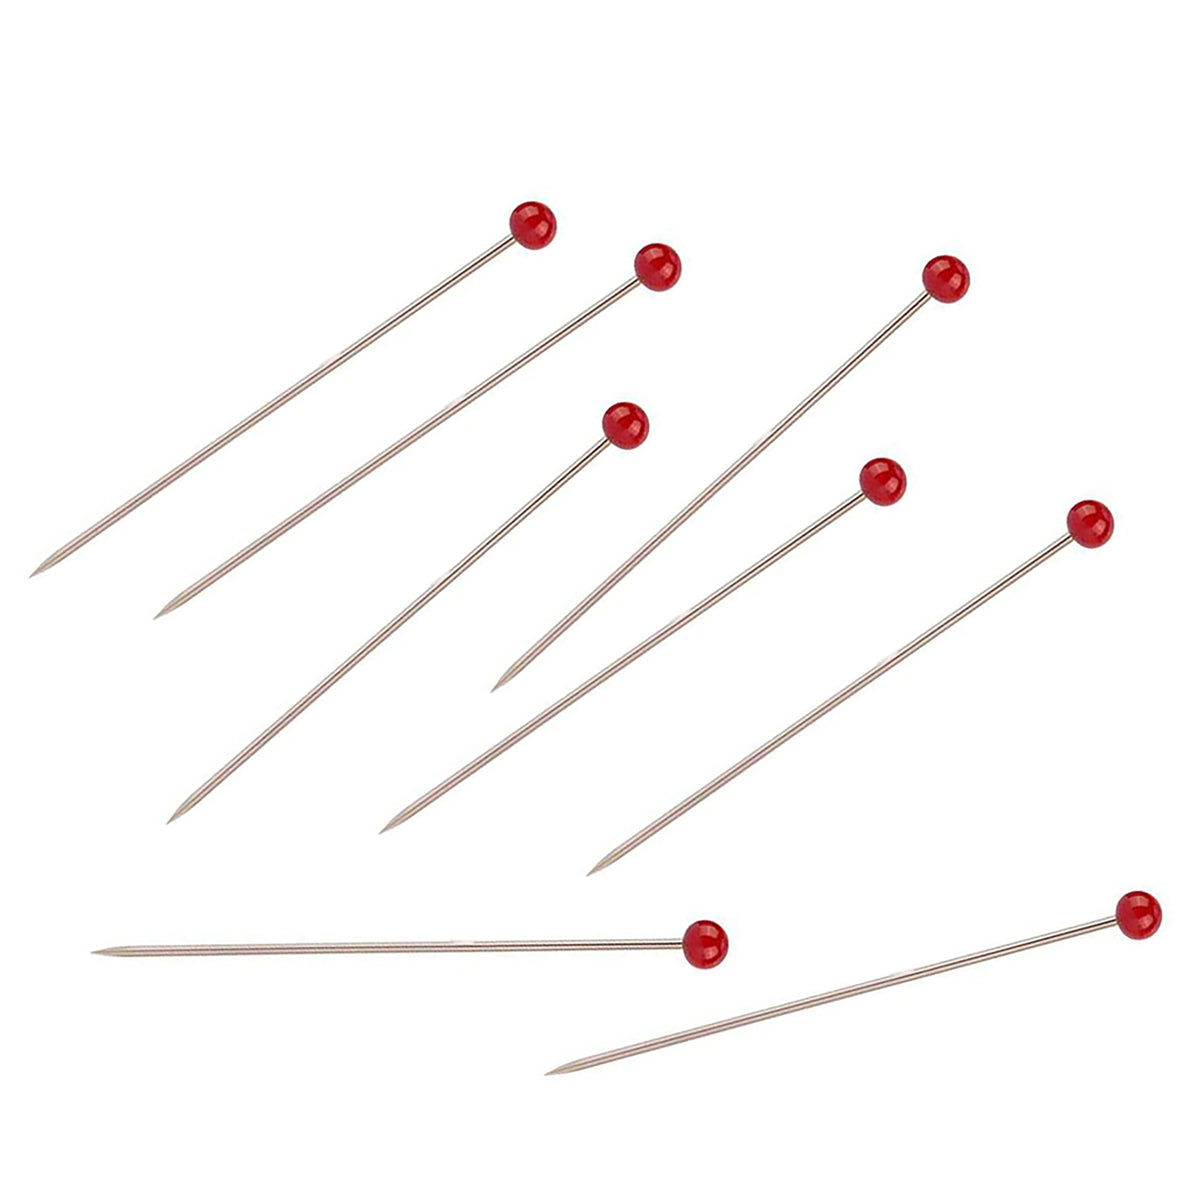 Quilting Pins (Heavy)